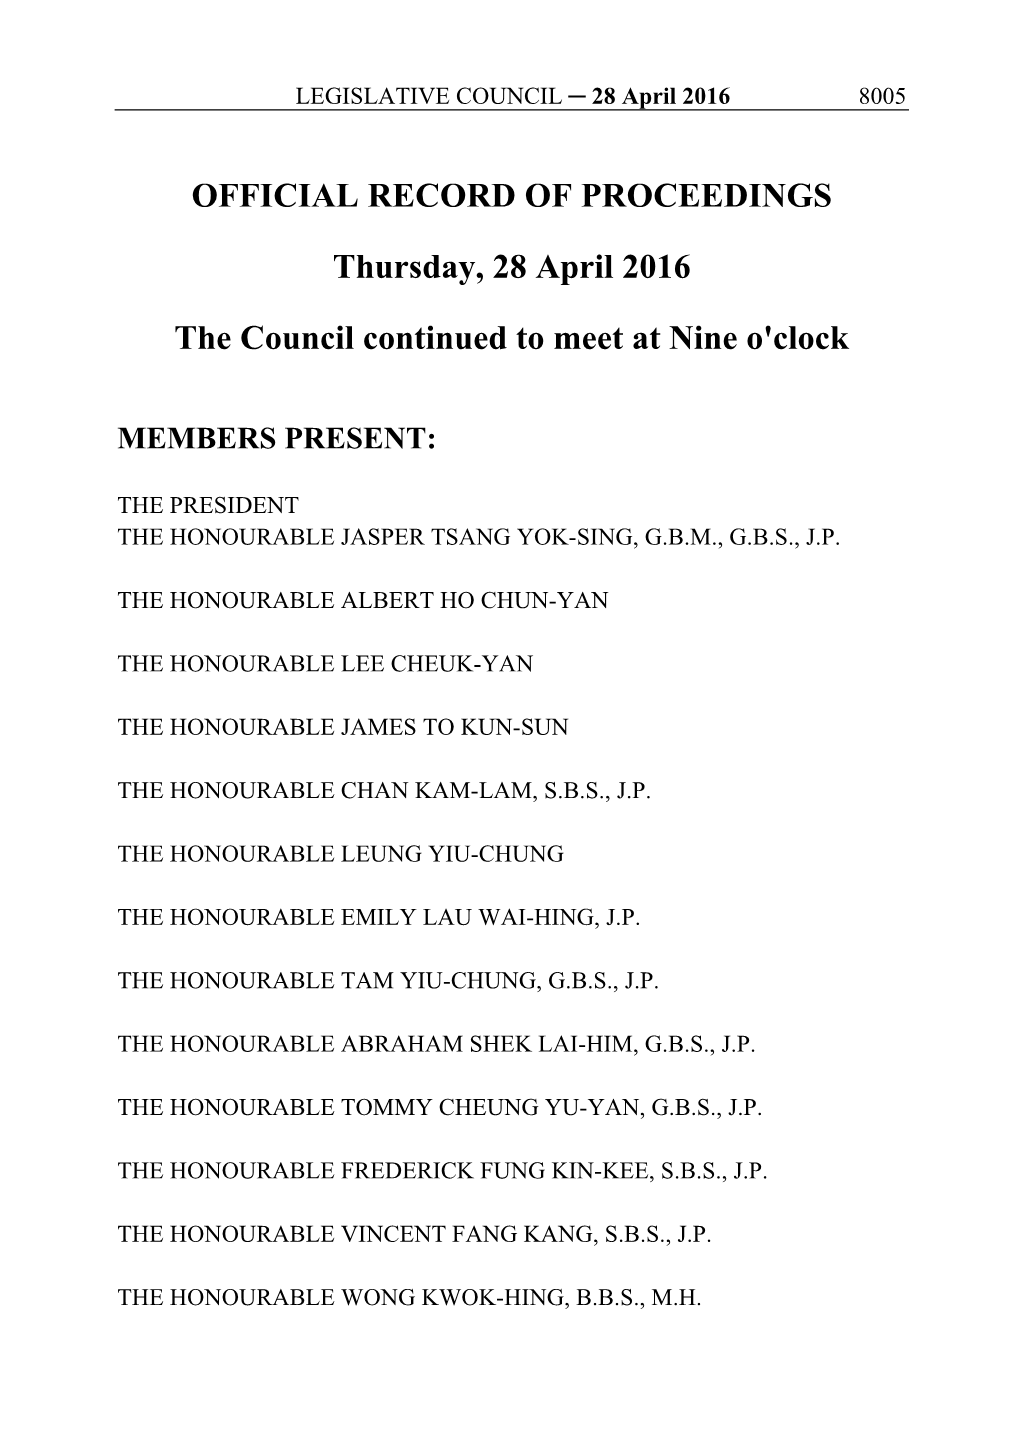 OFFICIAL RECORD of PROCEEDINGS Thursday, 28 April 2016 the Council Continued to Meet at Nine O'clock